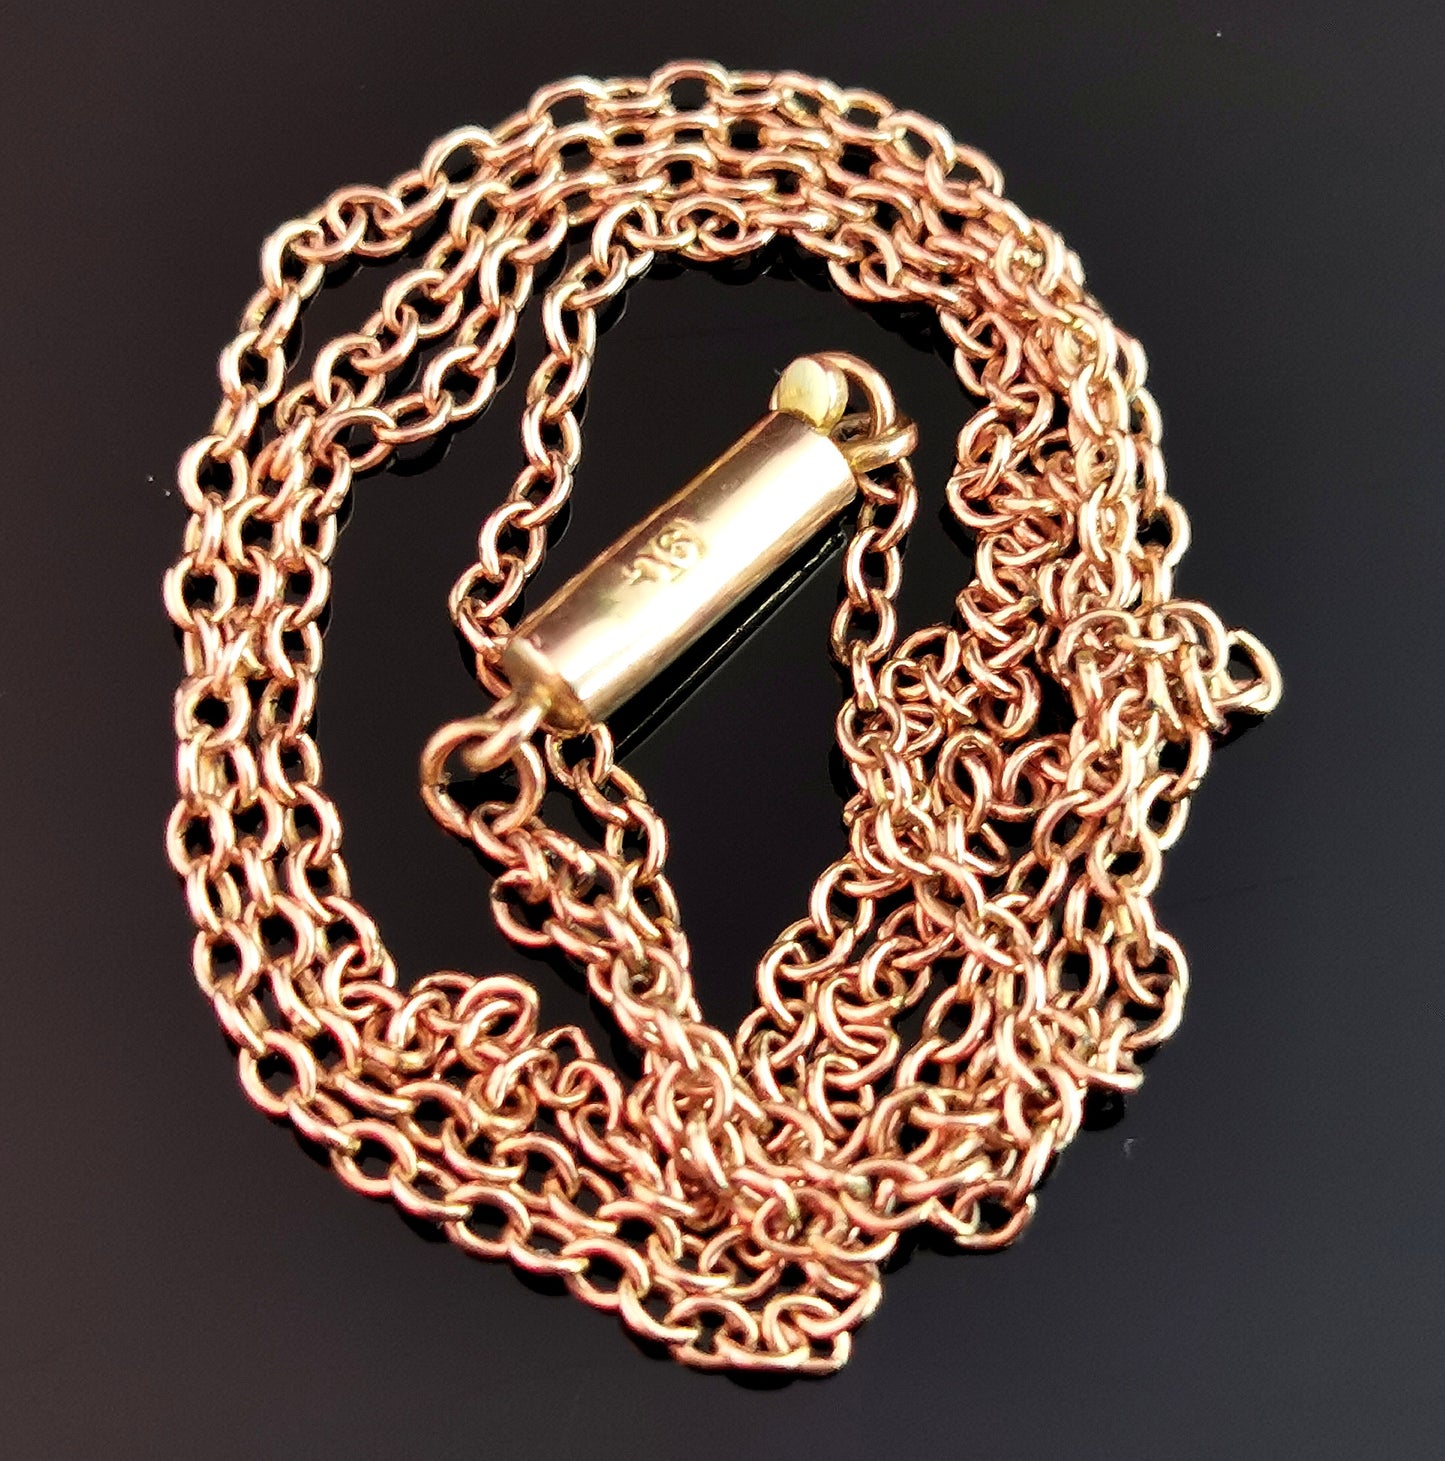 Antique 9ct Rose gold trace link chain necklace, Edwardian